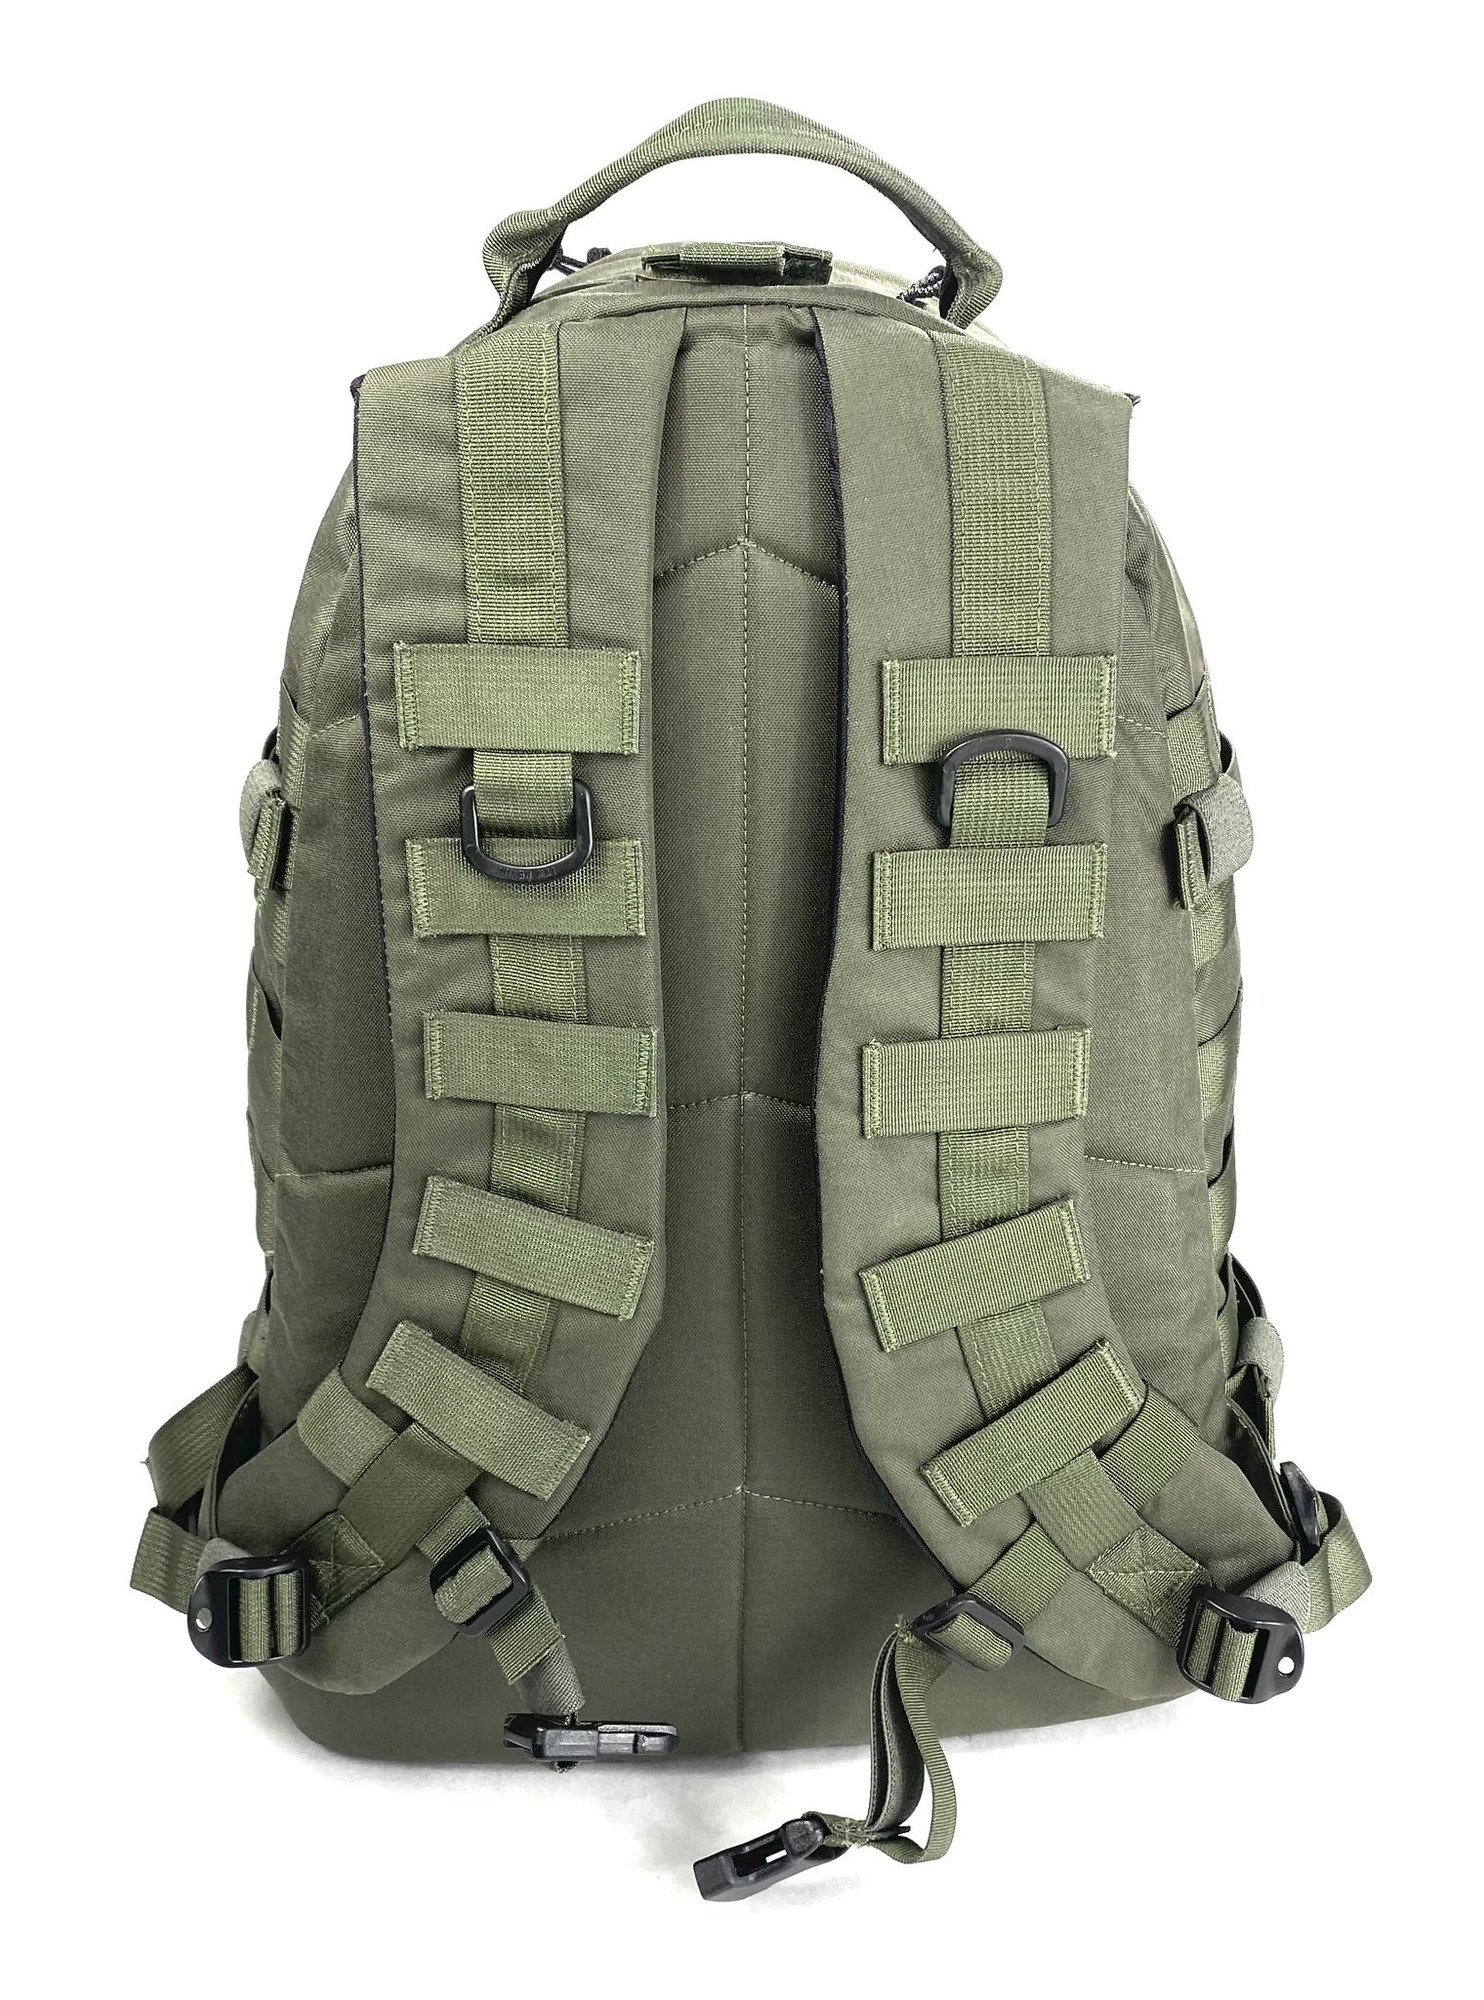 T3 gear】T3 3Day Hydration Backpack - 個人装備